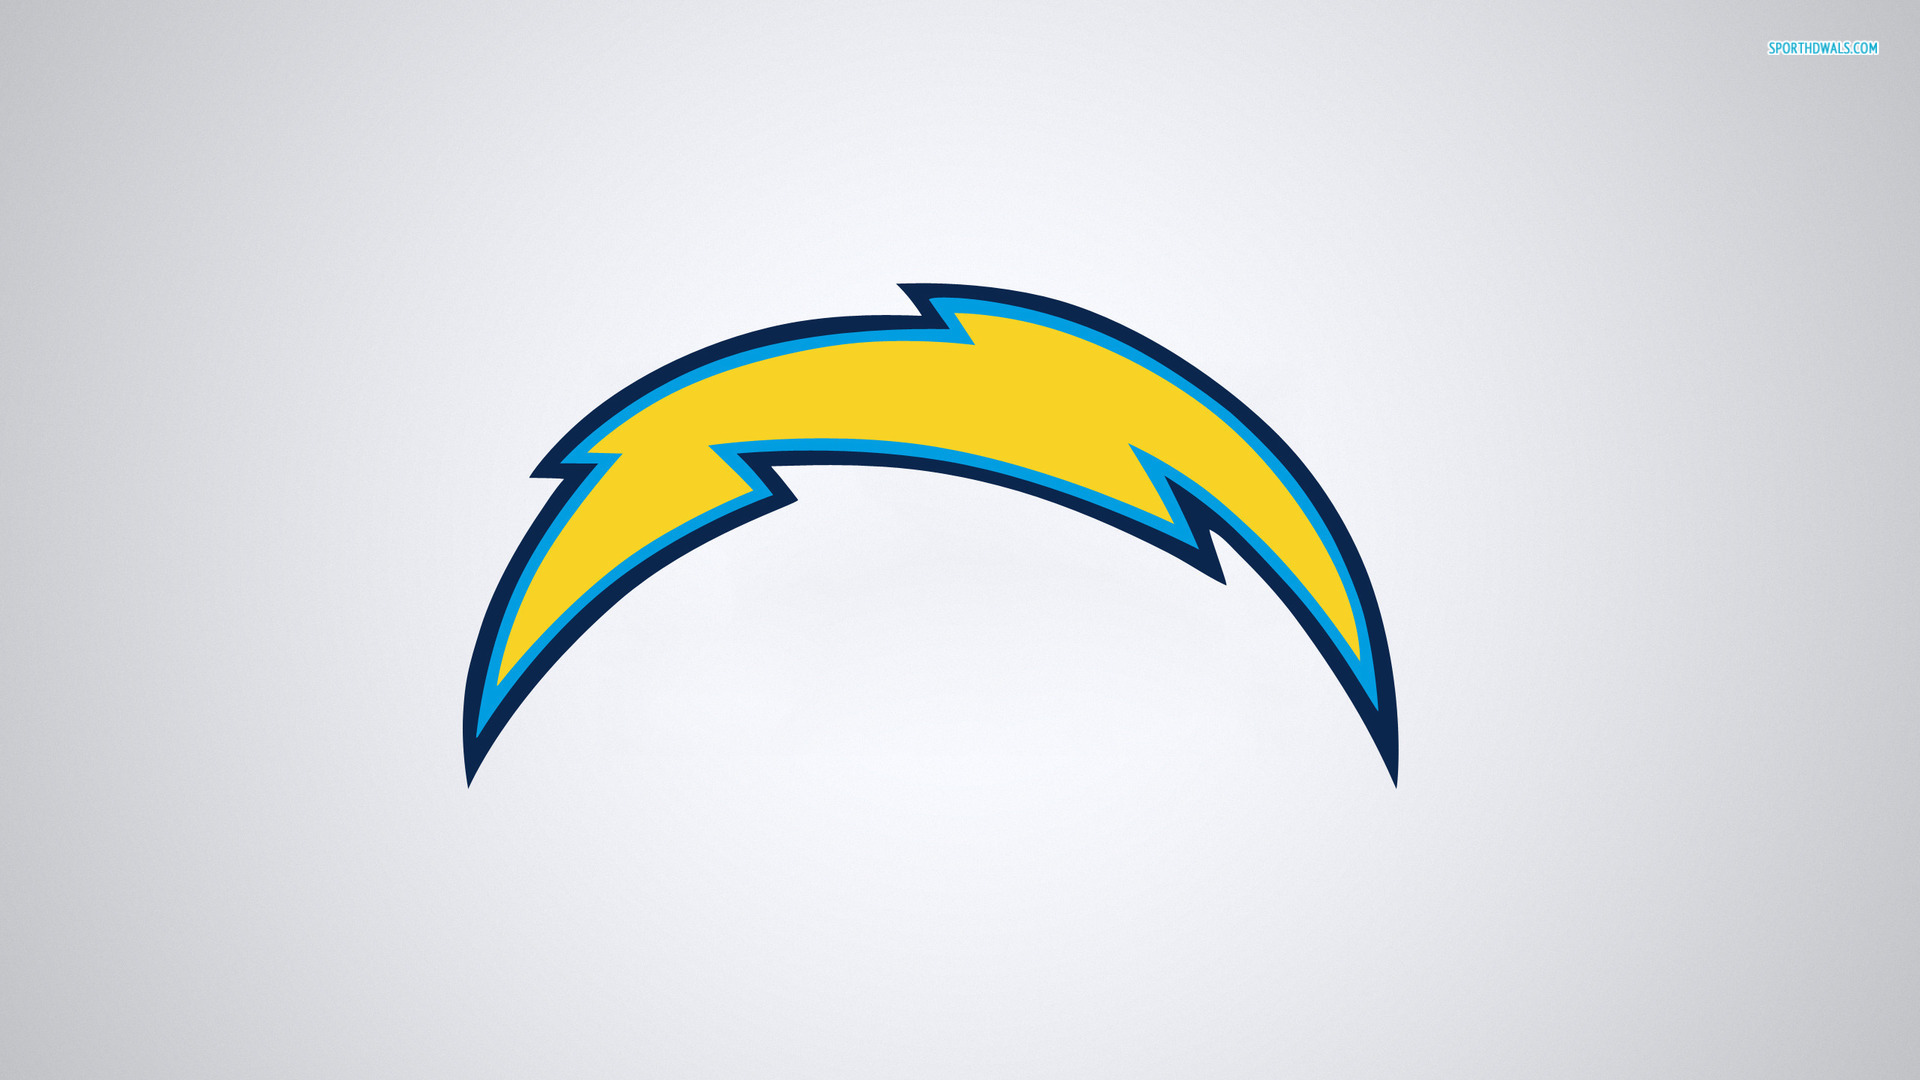 Wallpaper wallpaper sport logo NFL american football Los Angeles  Chargers images for desktop section спорт  download